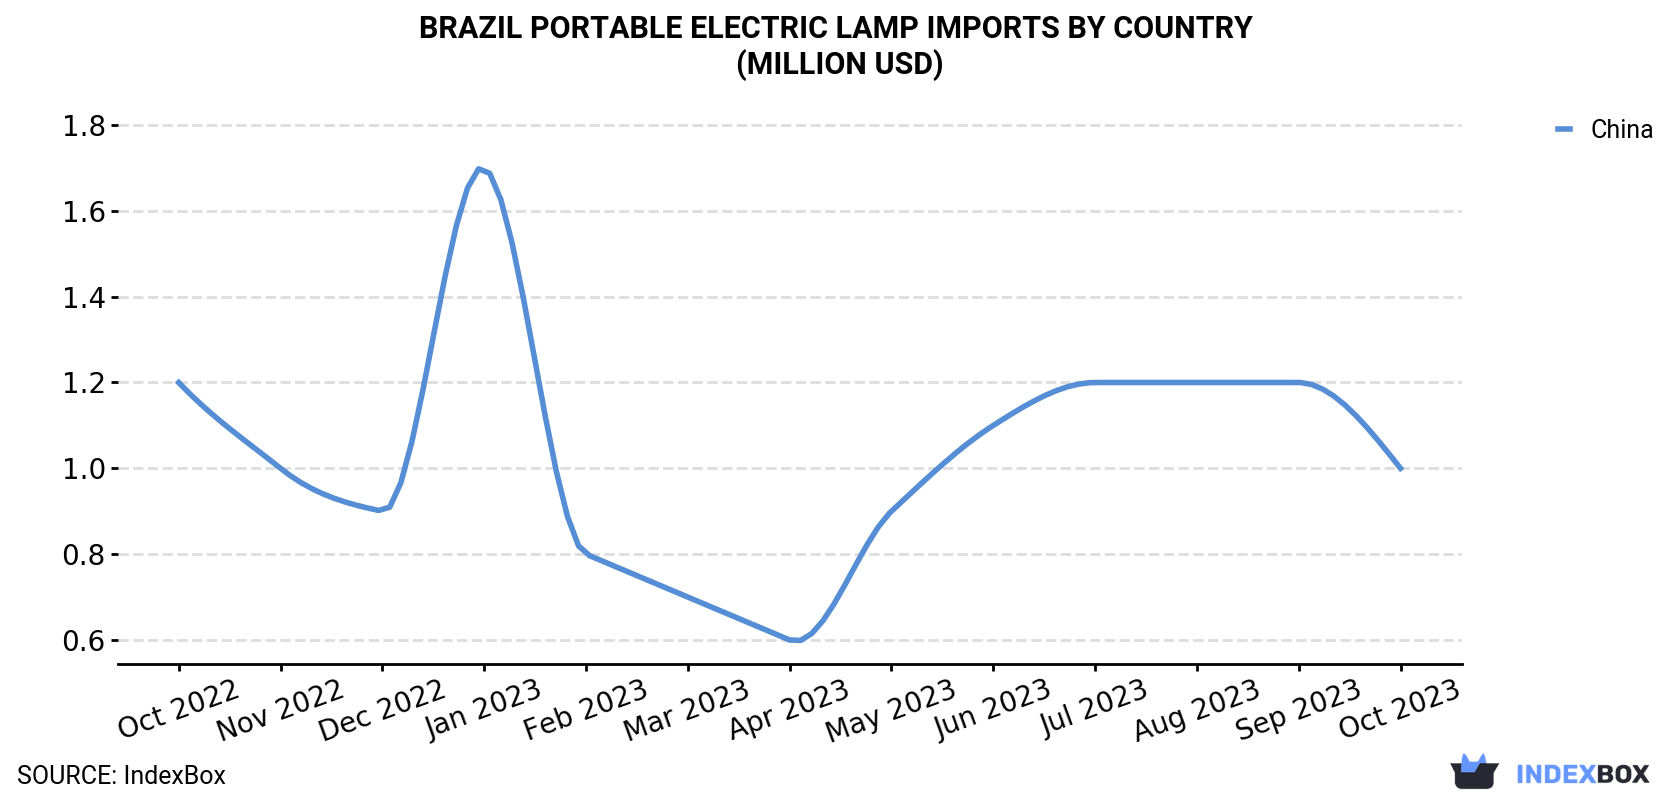 Brazil Portable Electric Lamp Imports By Country (Million USD)